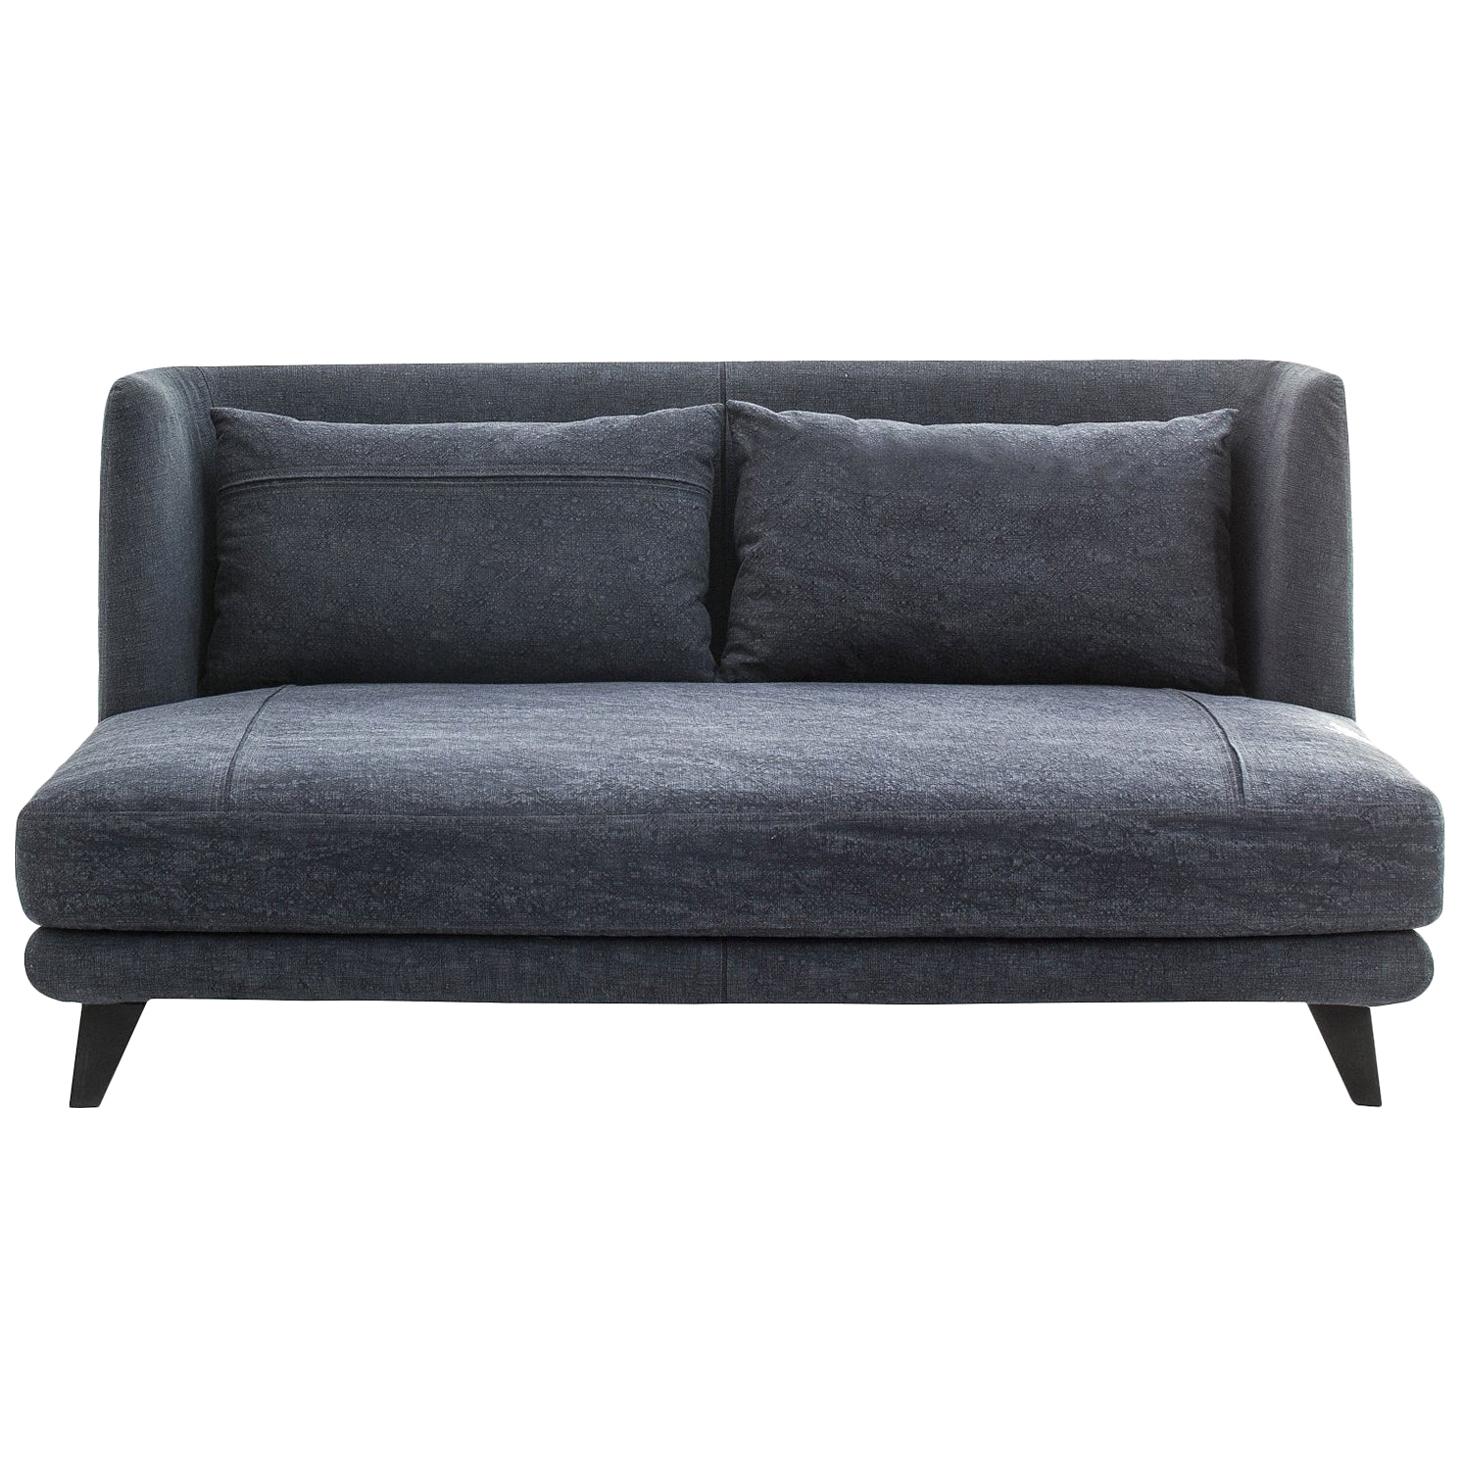 "Gimme More" Two-Seat Fabric Sofa with Fiber or Goose by Moroso for Diesel